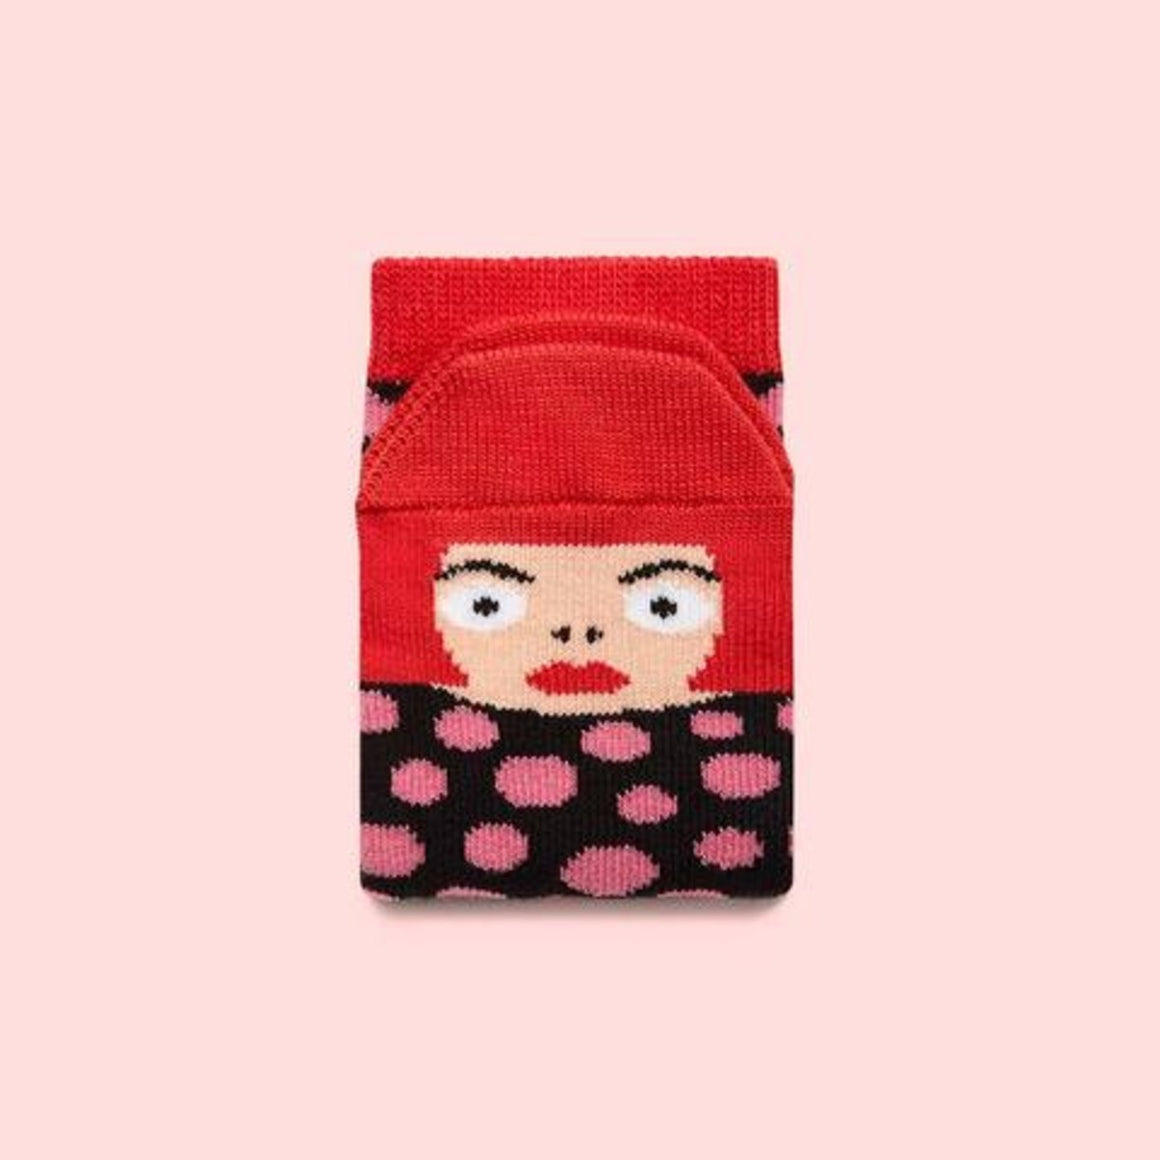 A sock with a cherry red band folded on a blush pink background shows the toe end with Yayoi Kasuma's face and cherry red bob.  